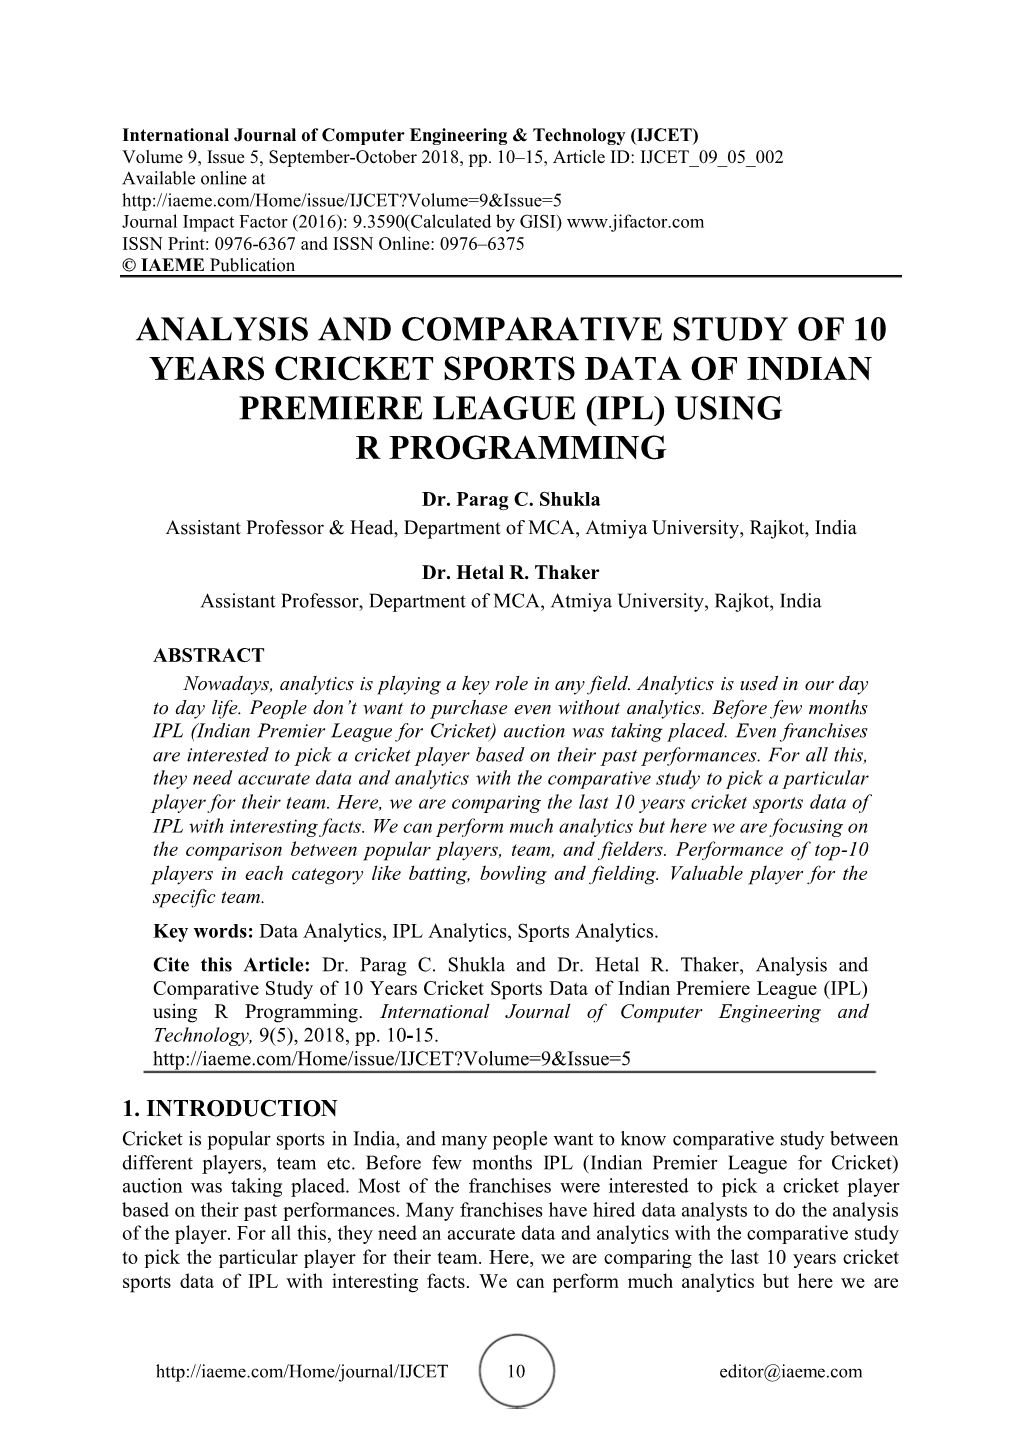 Analysis and Comparative Study of 10 Years Cricket Sports Data of Indian Premiere League (Ipl) Using R Programming